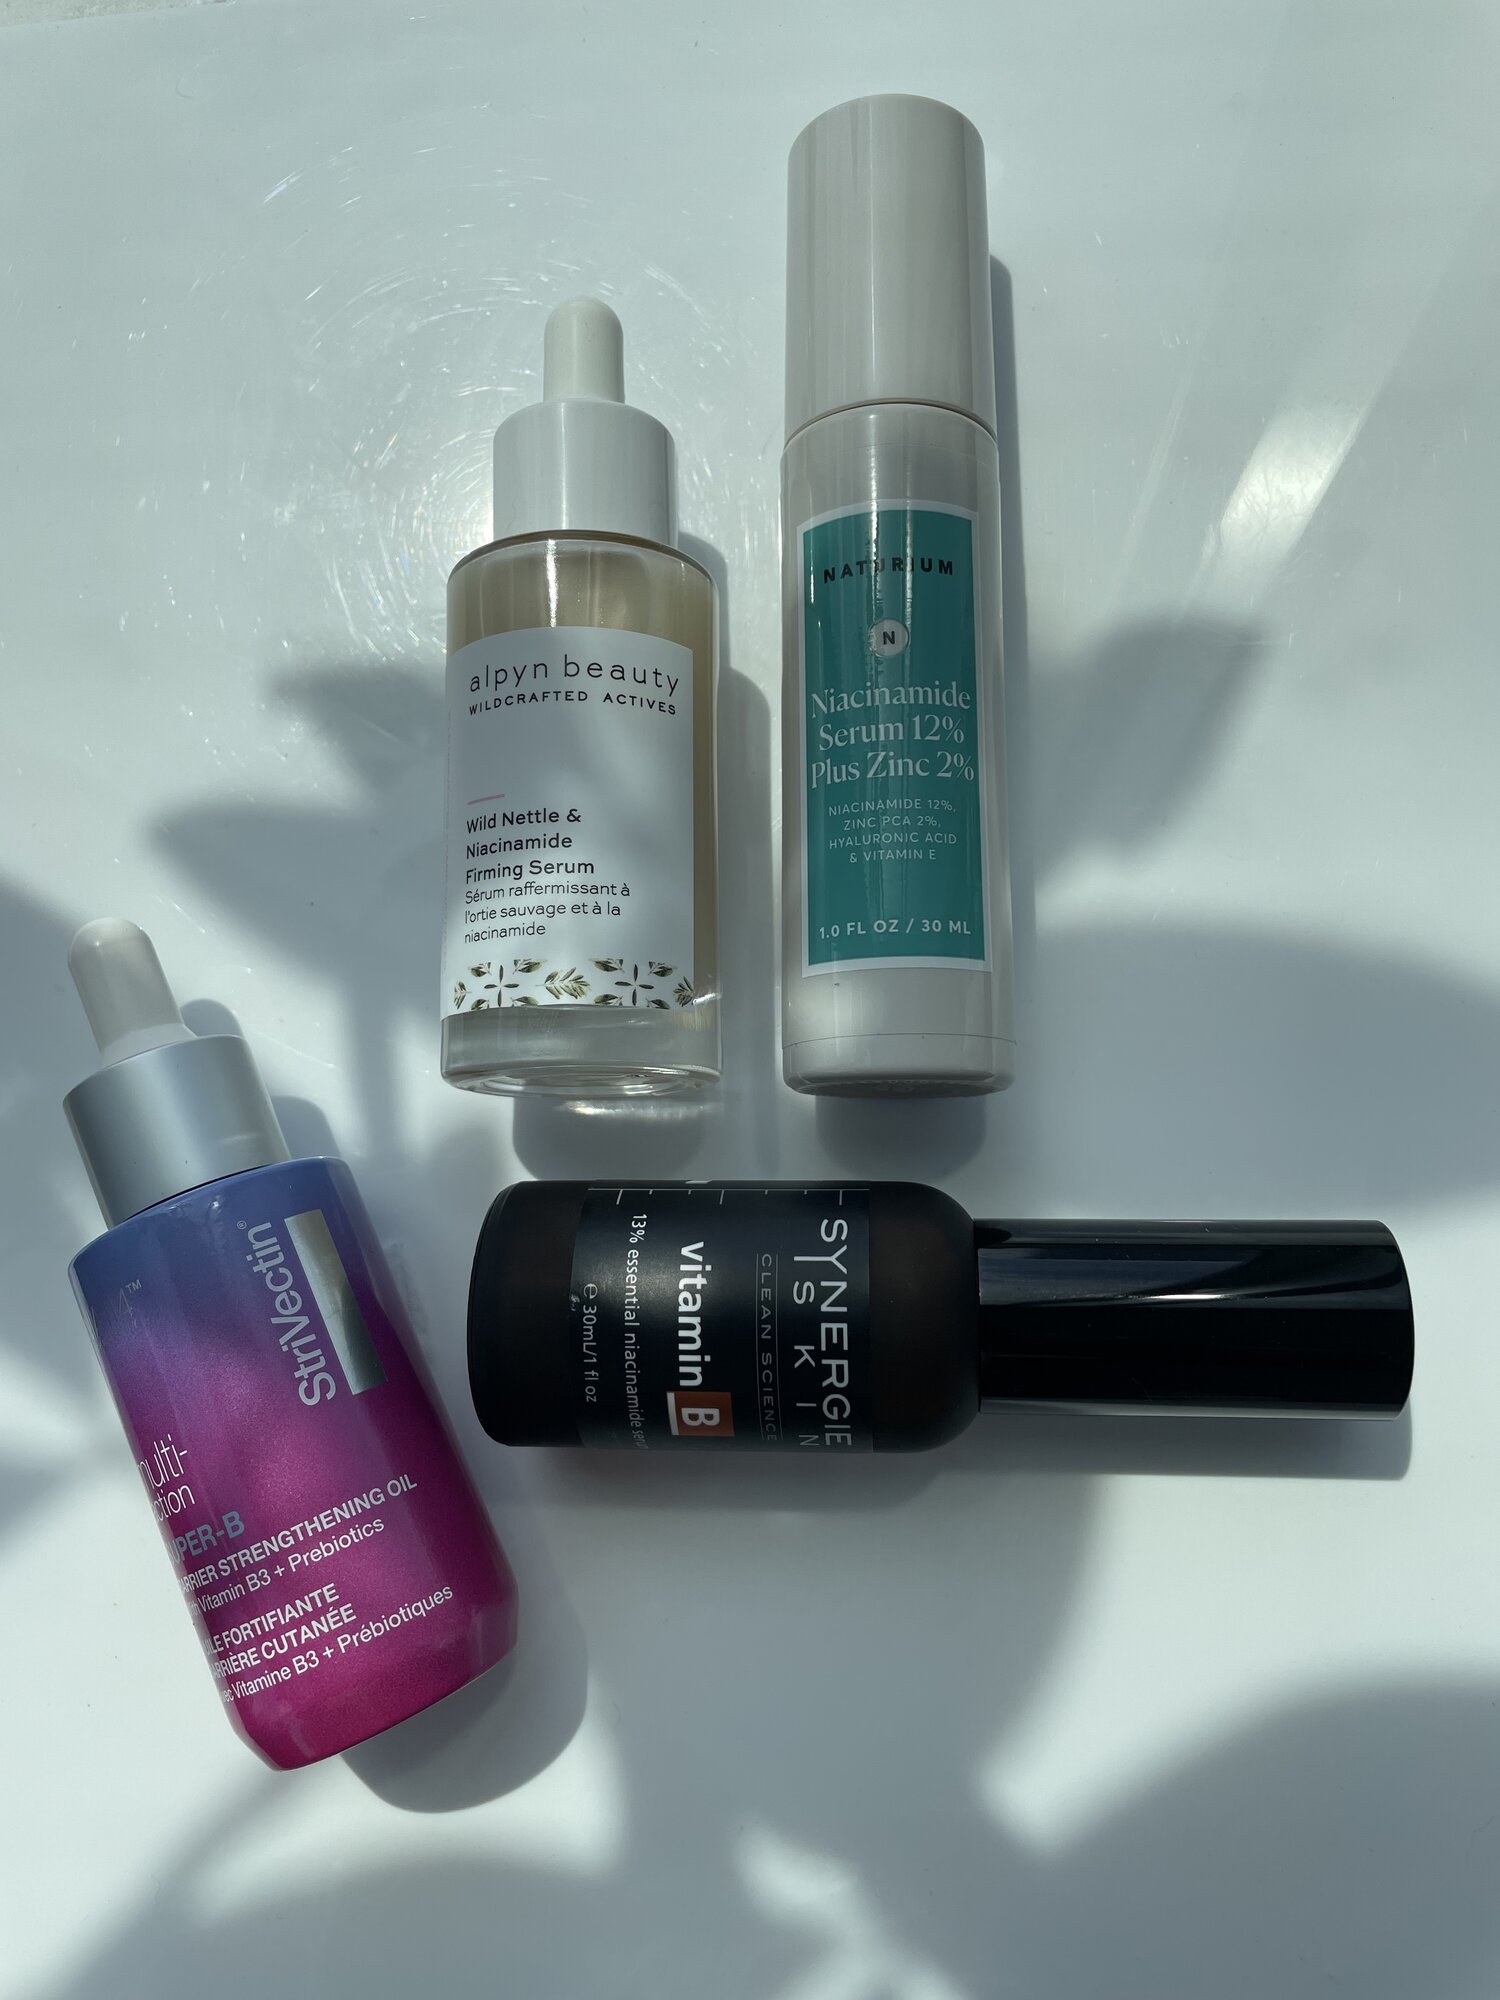 ALPYN BEST AND NIACINAMIDE FROM NATURIUM, NIACINAMIDE SERUMS SERUMS BEAUTY - STRIVECTIN